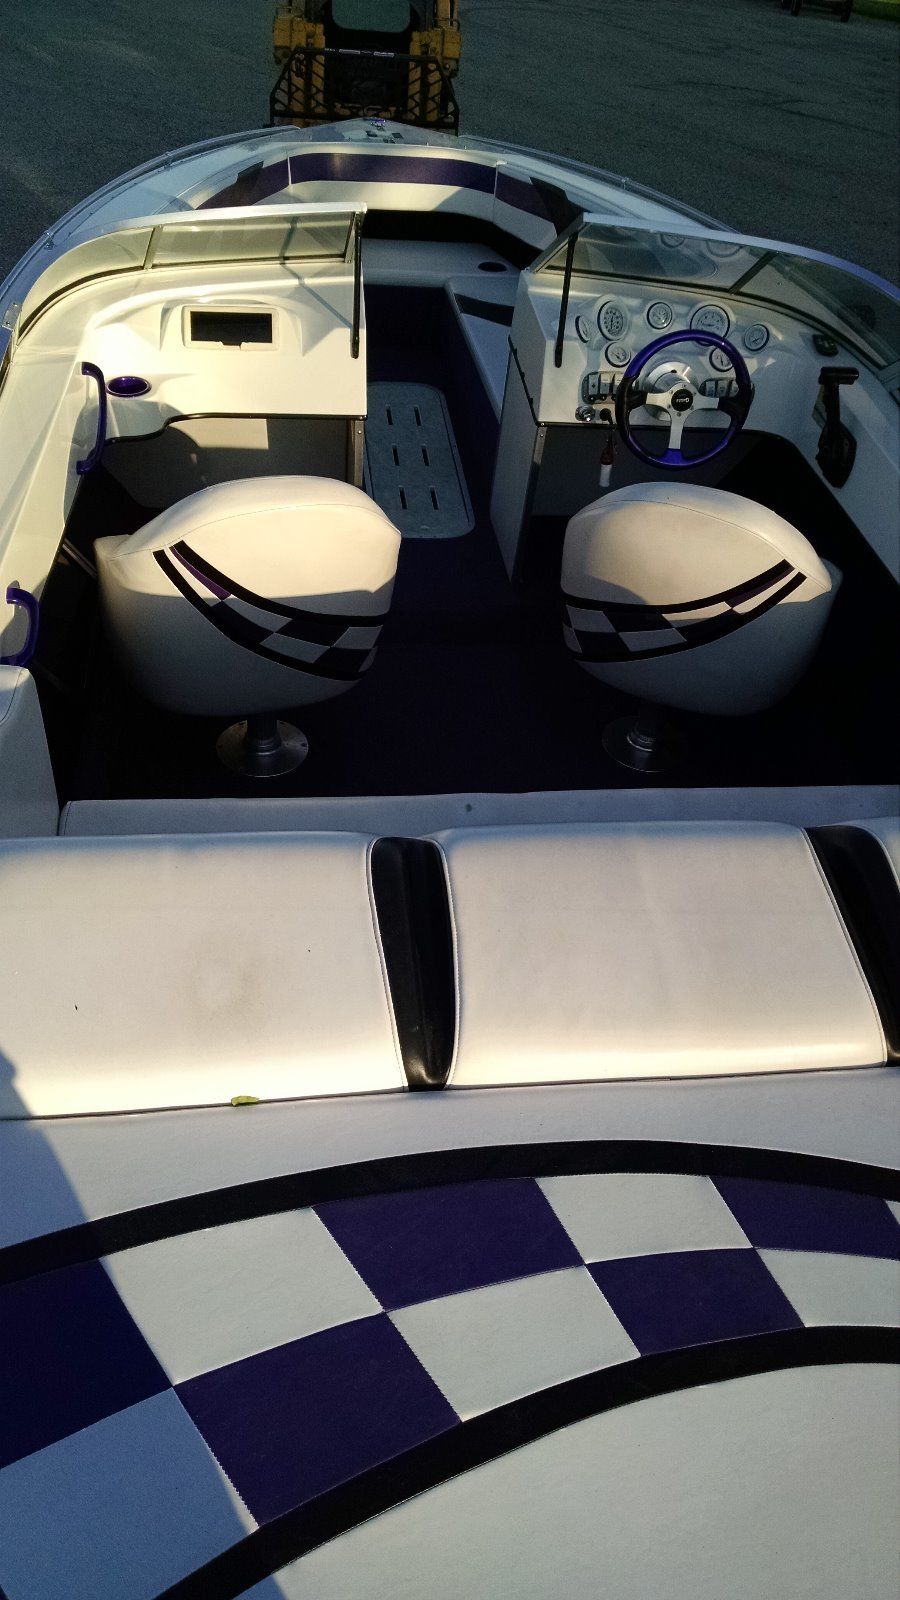 checkmate boat covers